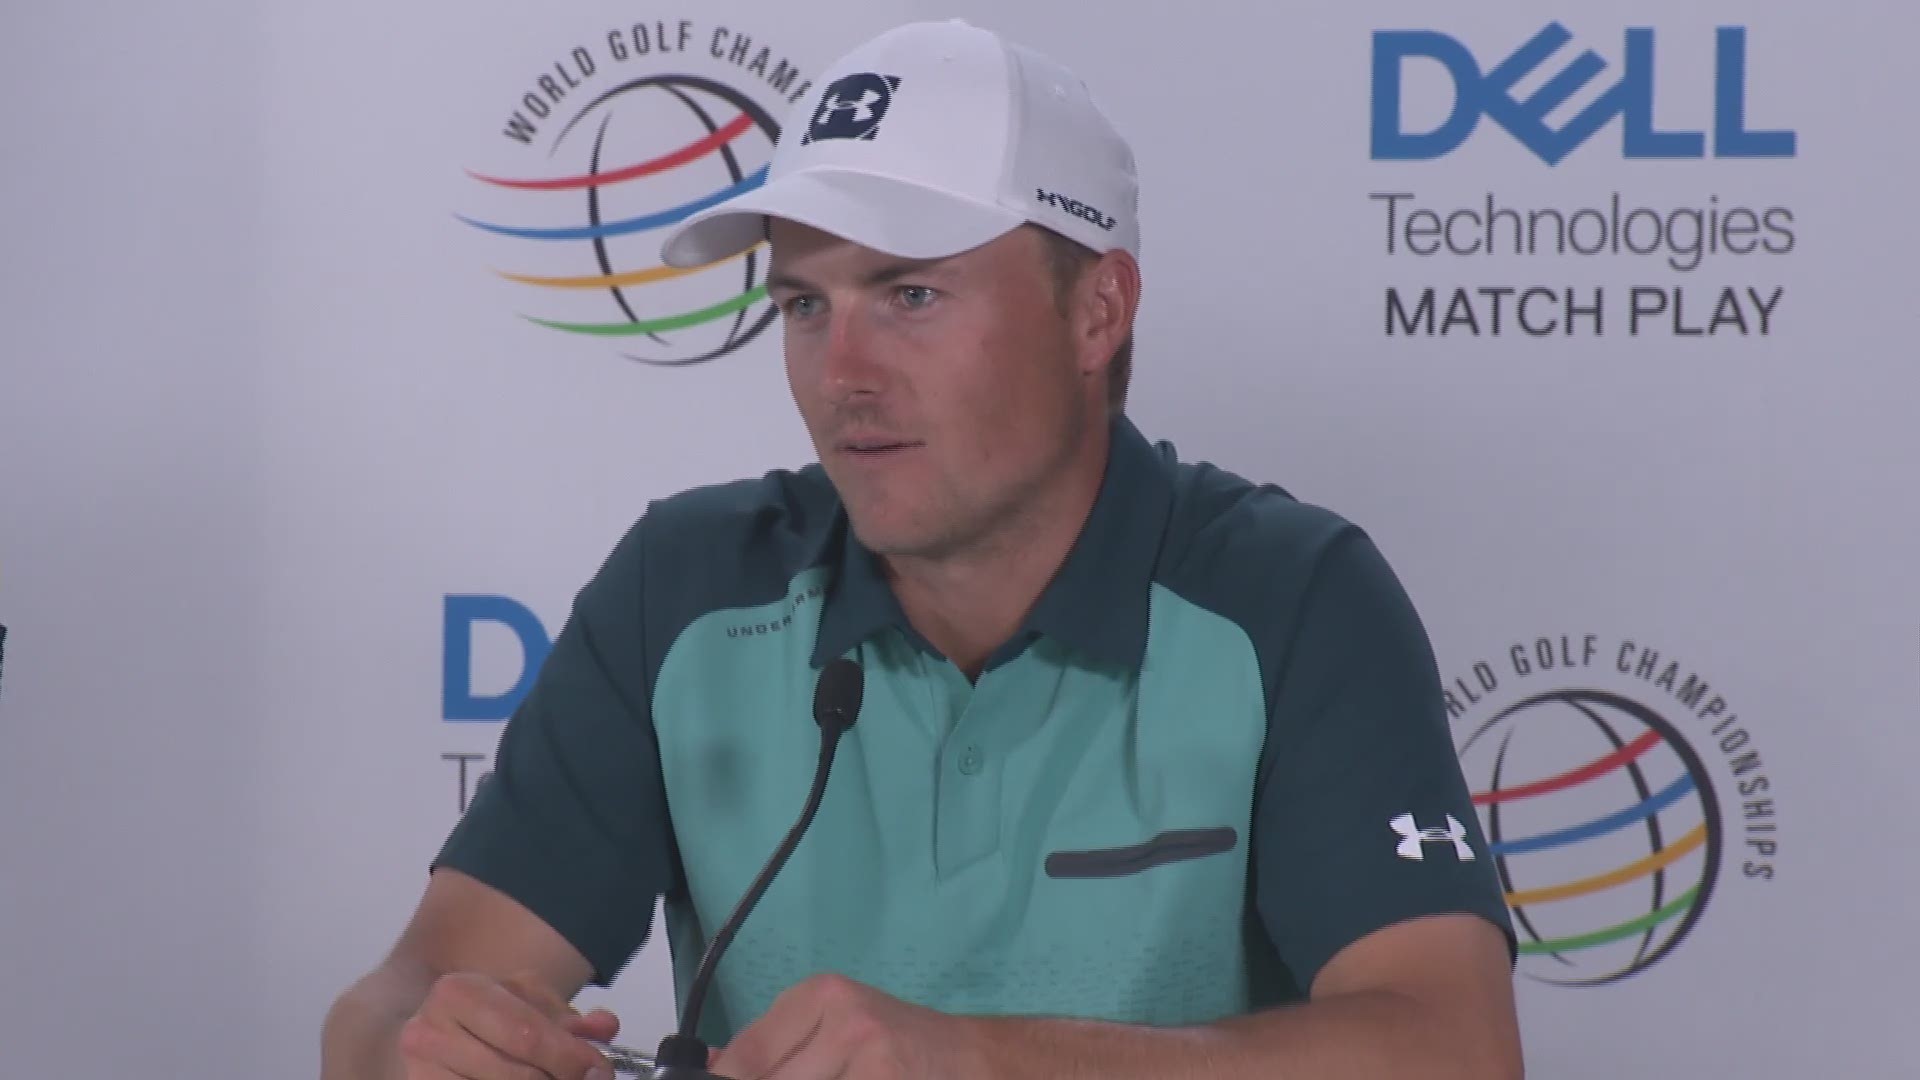 Spieth prepares for Dell Match Play.